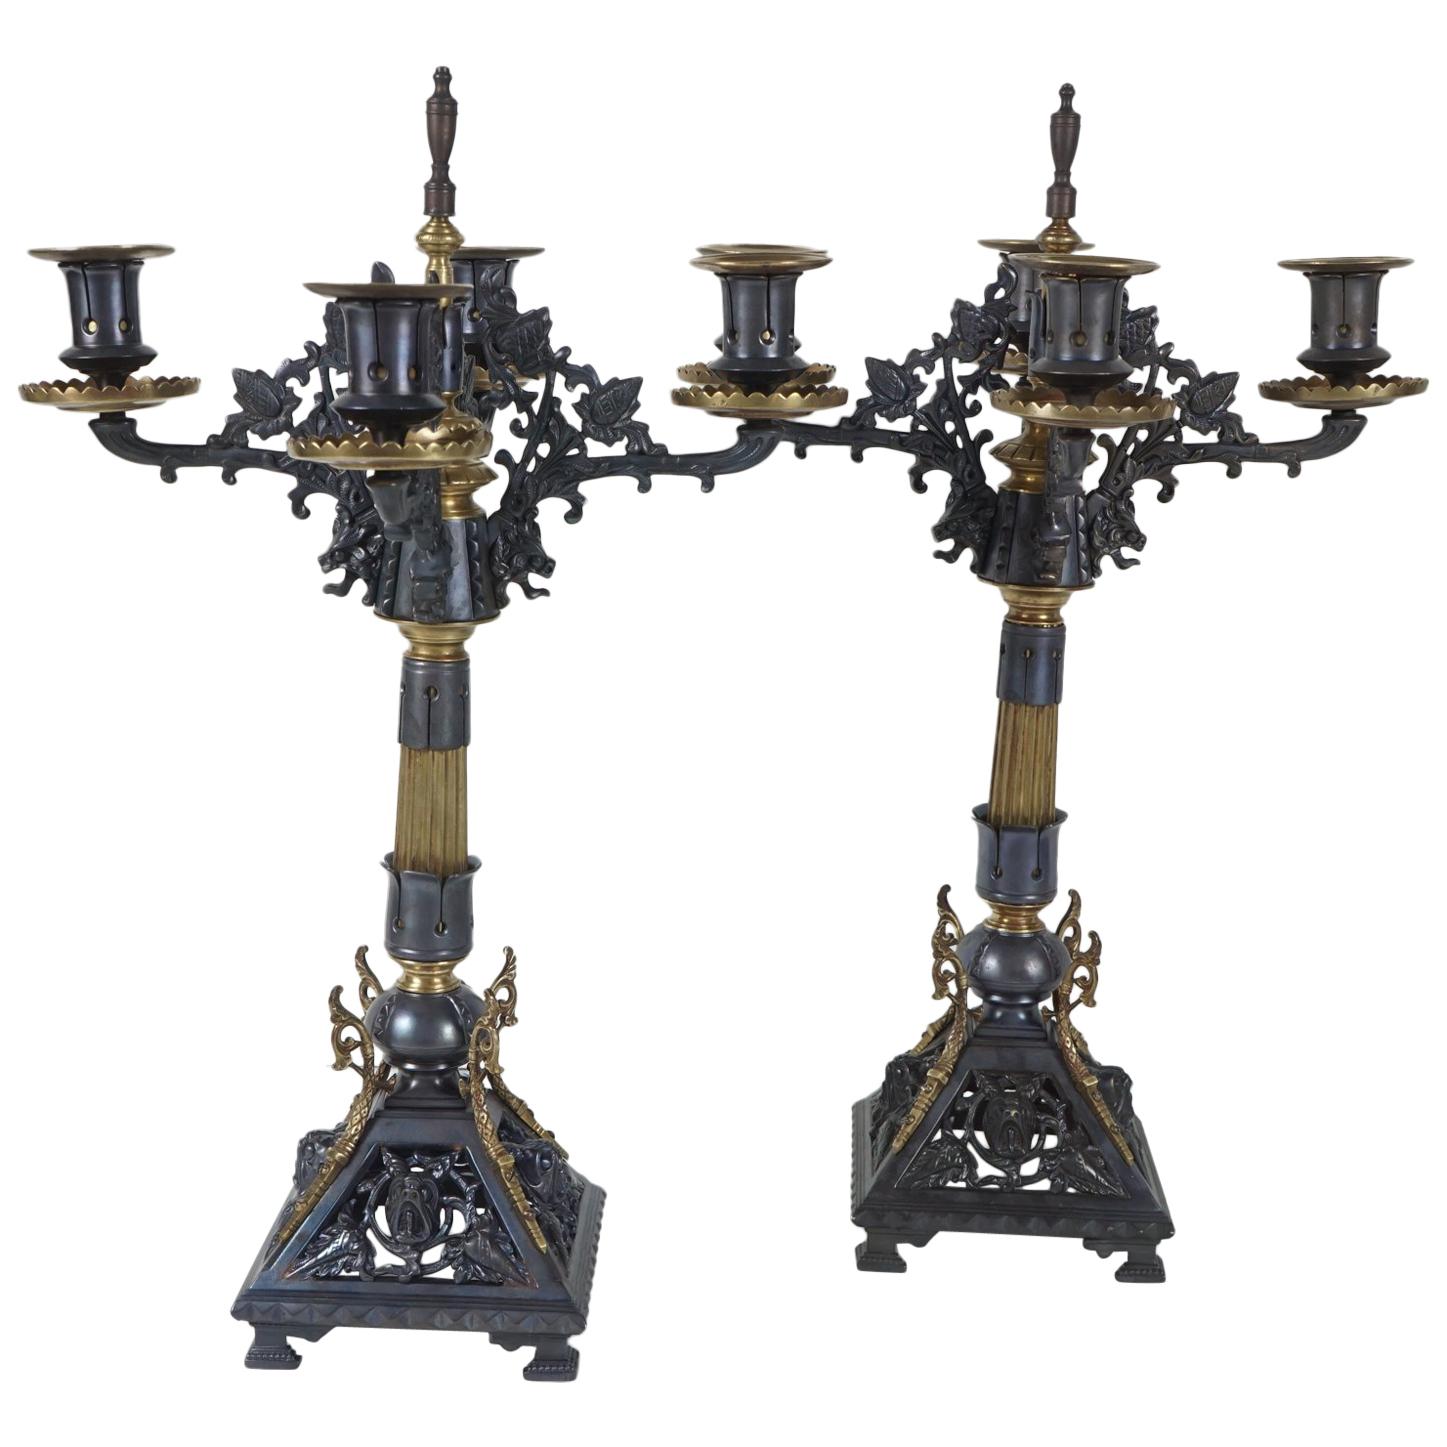 Pair of Patinated and Polished Bronze Renaissance Revival Candelabra